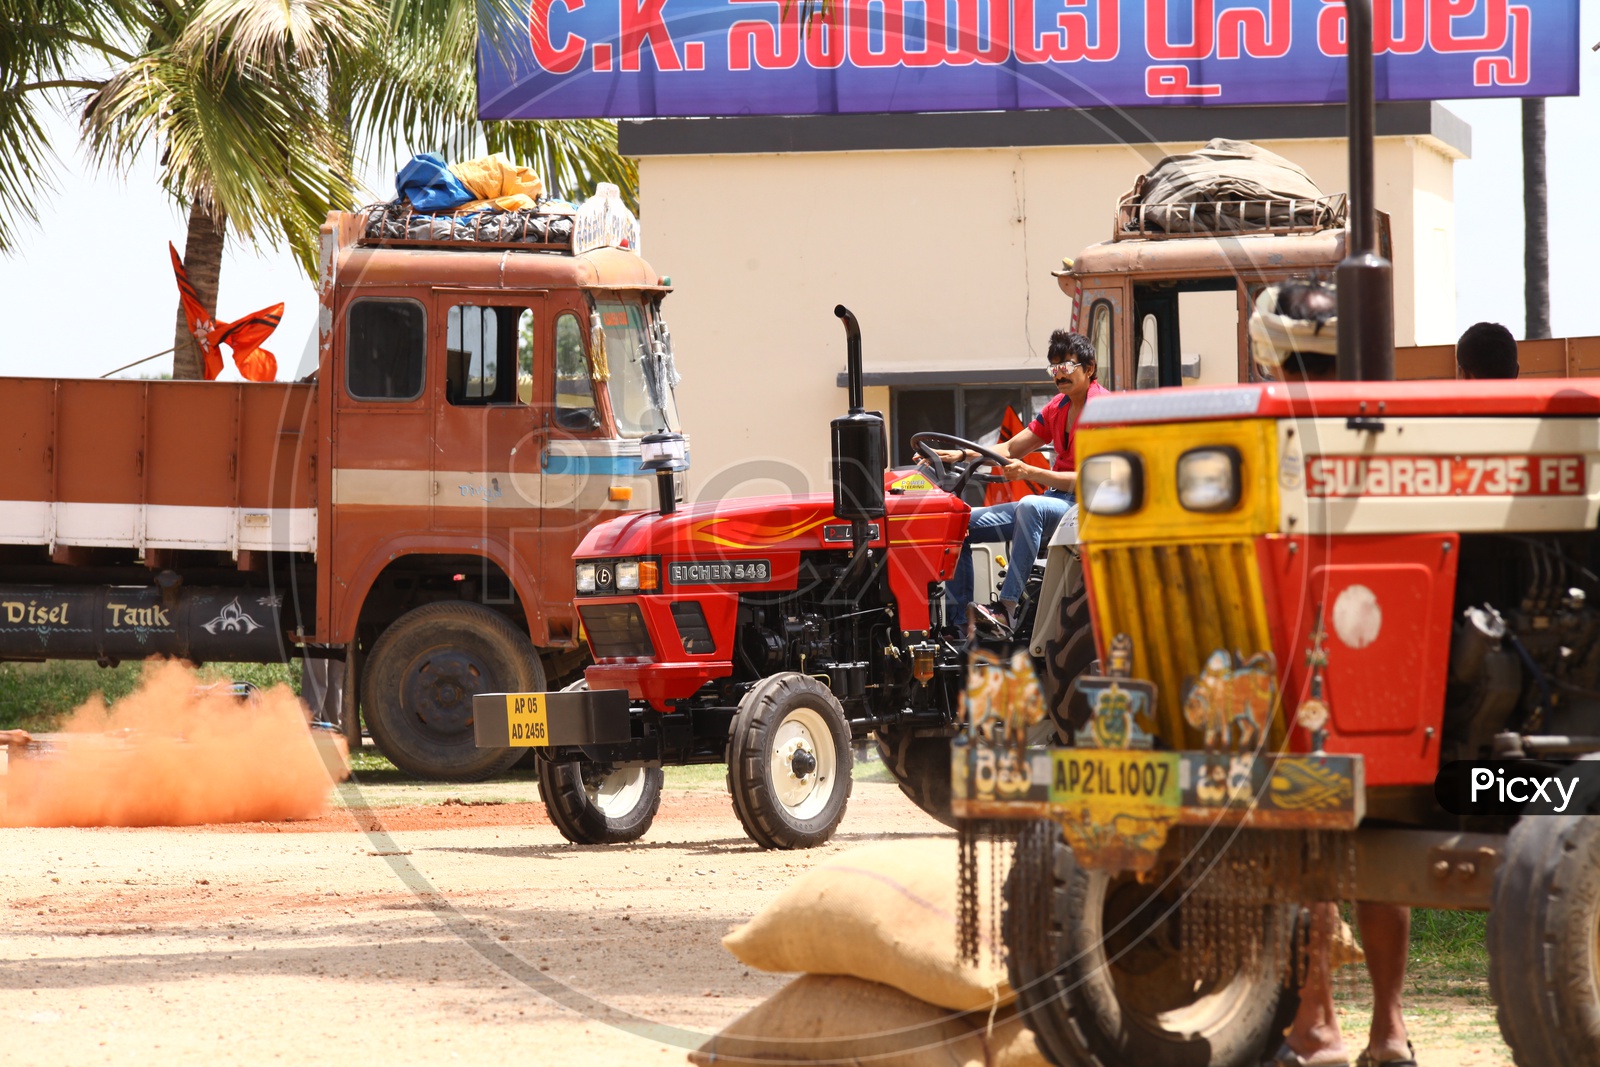 Indian Actor Ravi Teja on Tractor